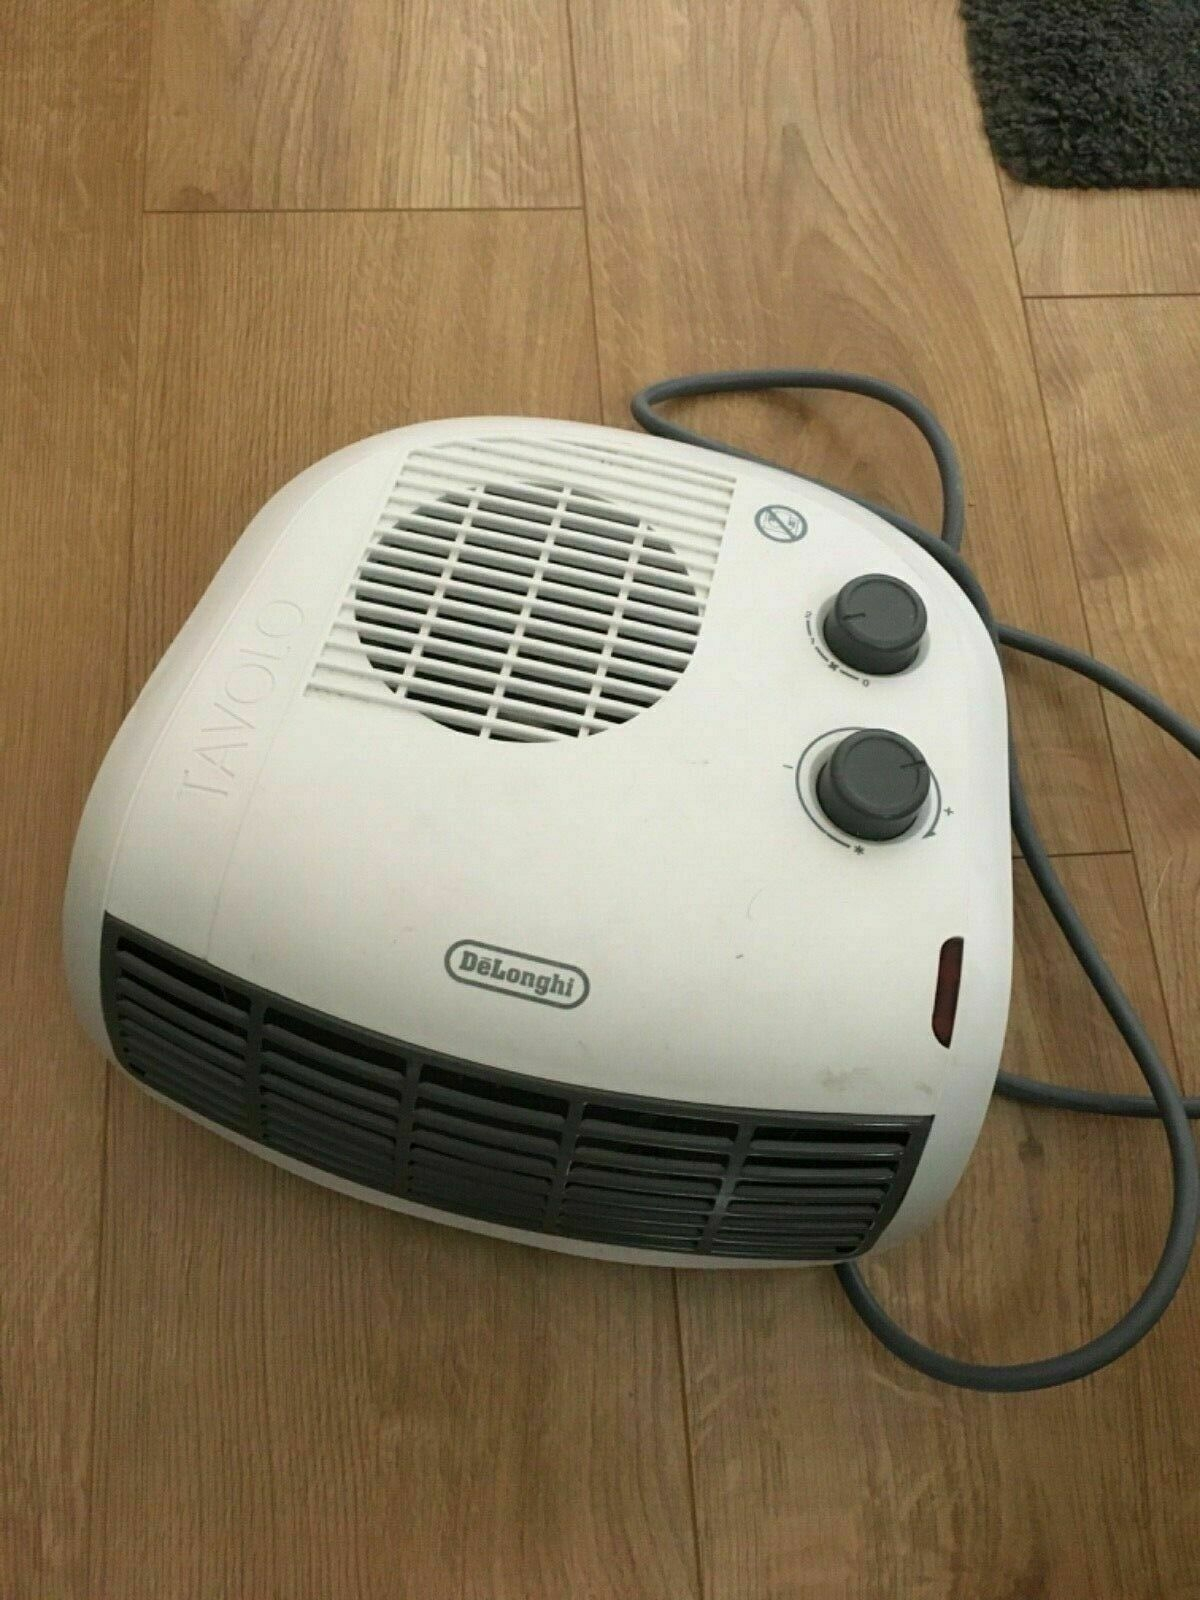 Delonghi Htf 3033 Electric Compact Heater throughout size 1200 X 1600